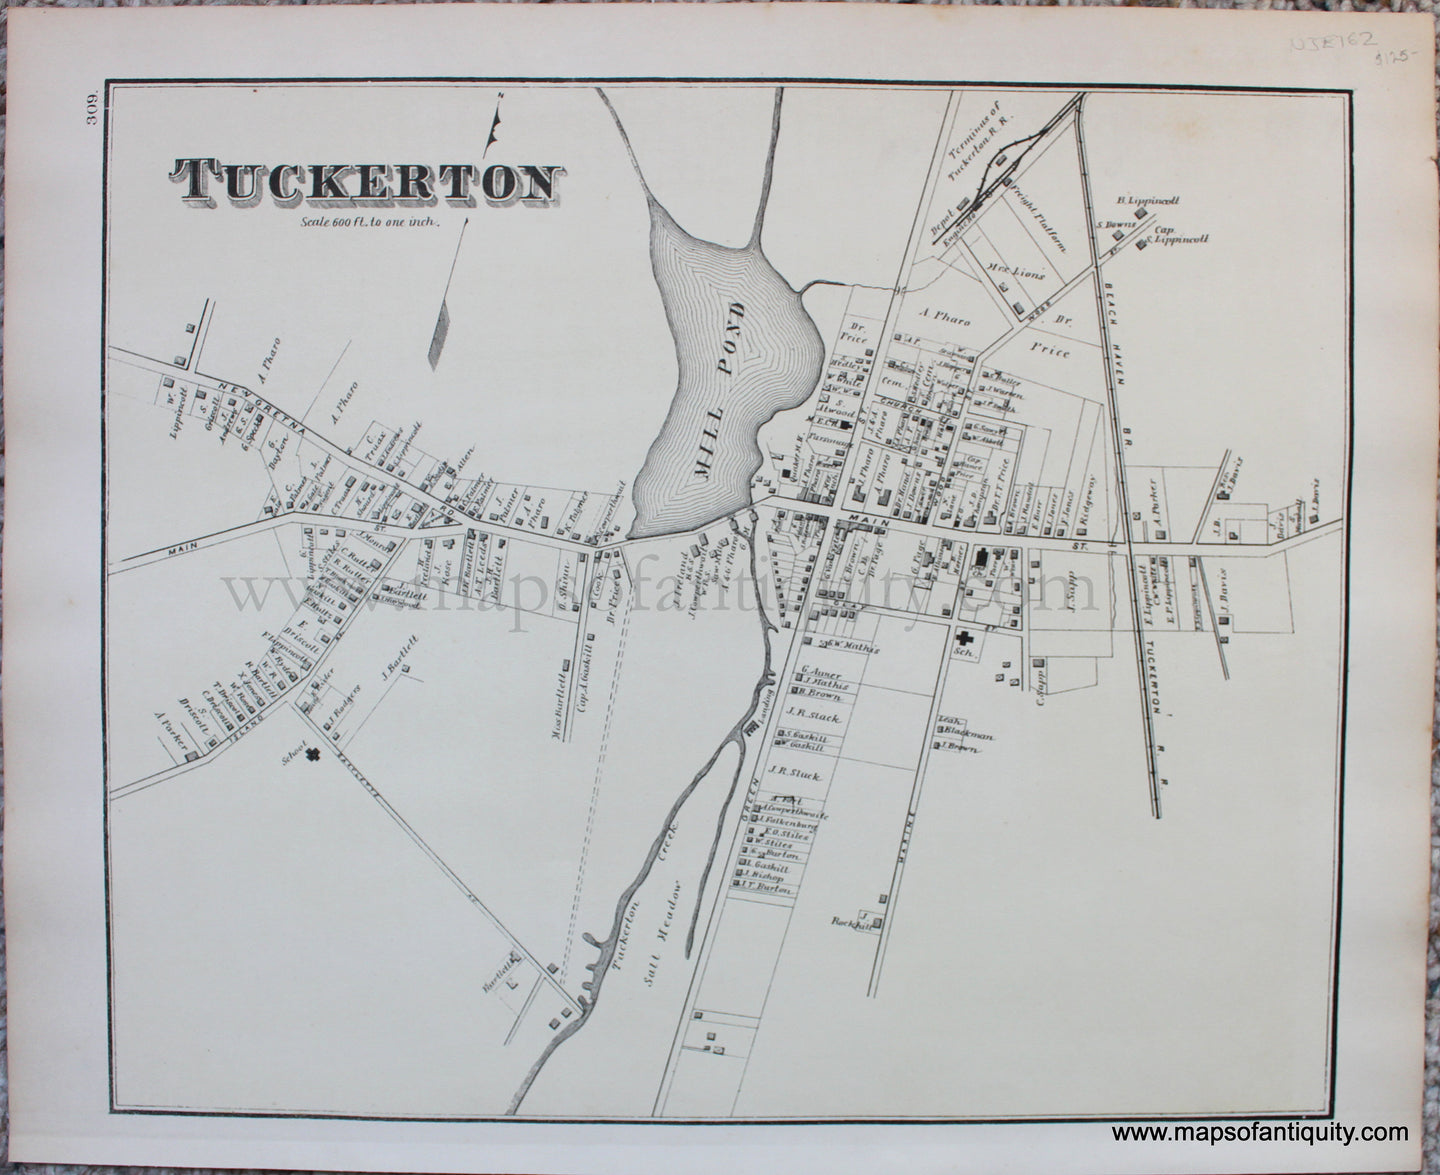 Black-and-White-Engraved-Antique-Map-Tuckerton-N.J.-********-United-States-New-Jersey-1878-Woolman-&-Rose-Maps-Of-Antiquity